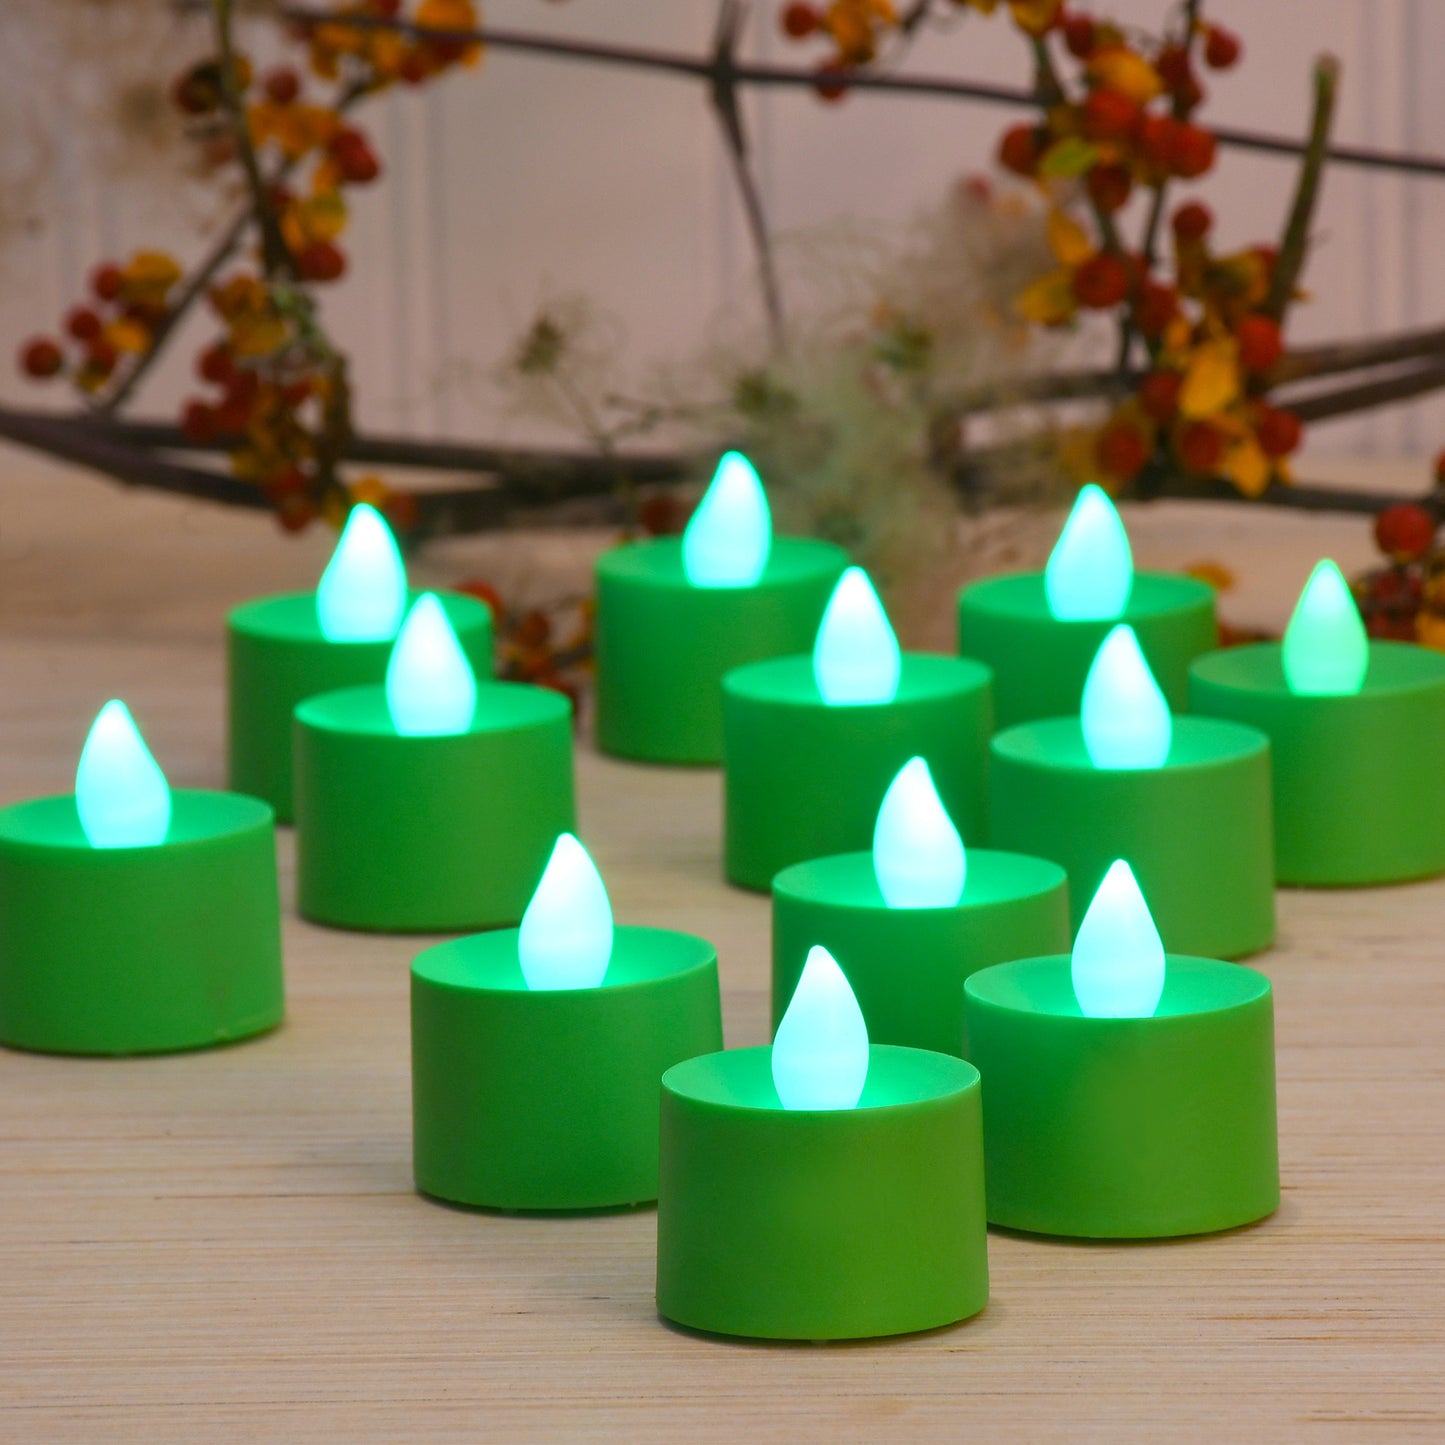 Battery Powered LED Flickering Tealights - Set of 12 - Green